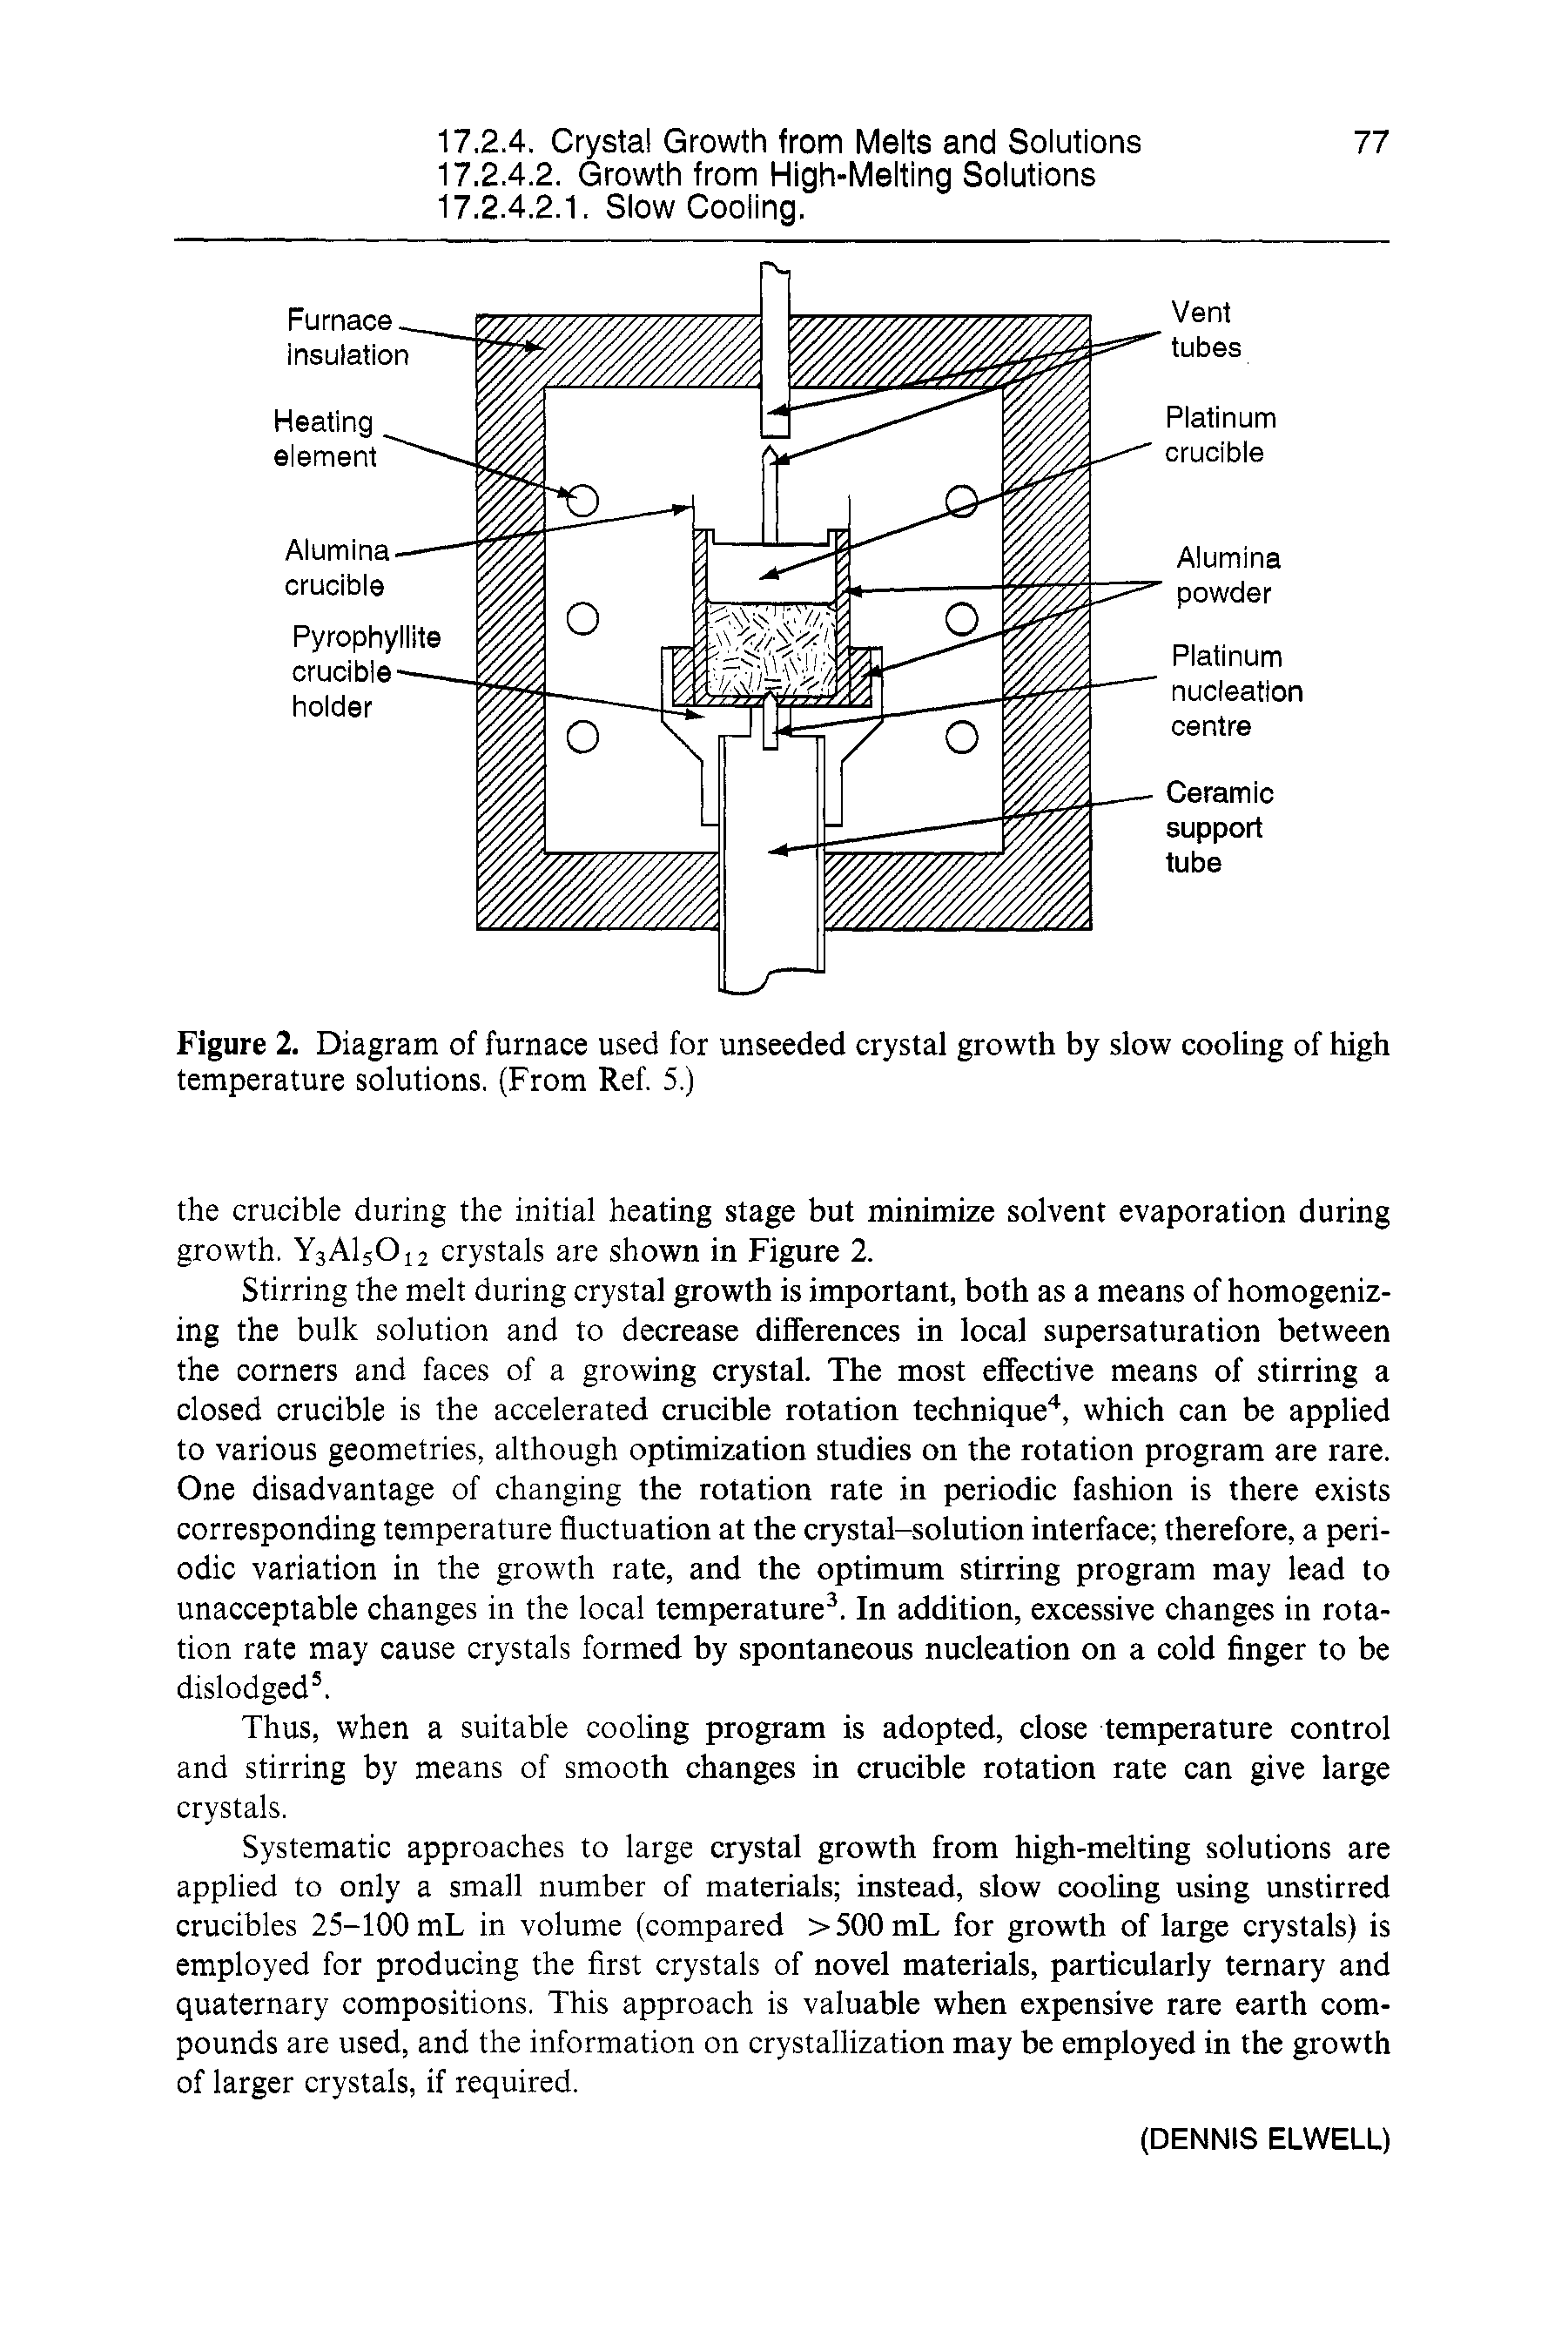 Figure 2. Diagram of furnace used for unseeded crystal growth by slow cooling of high temperature solutions. (From Ref. 5.)...